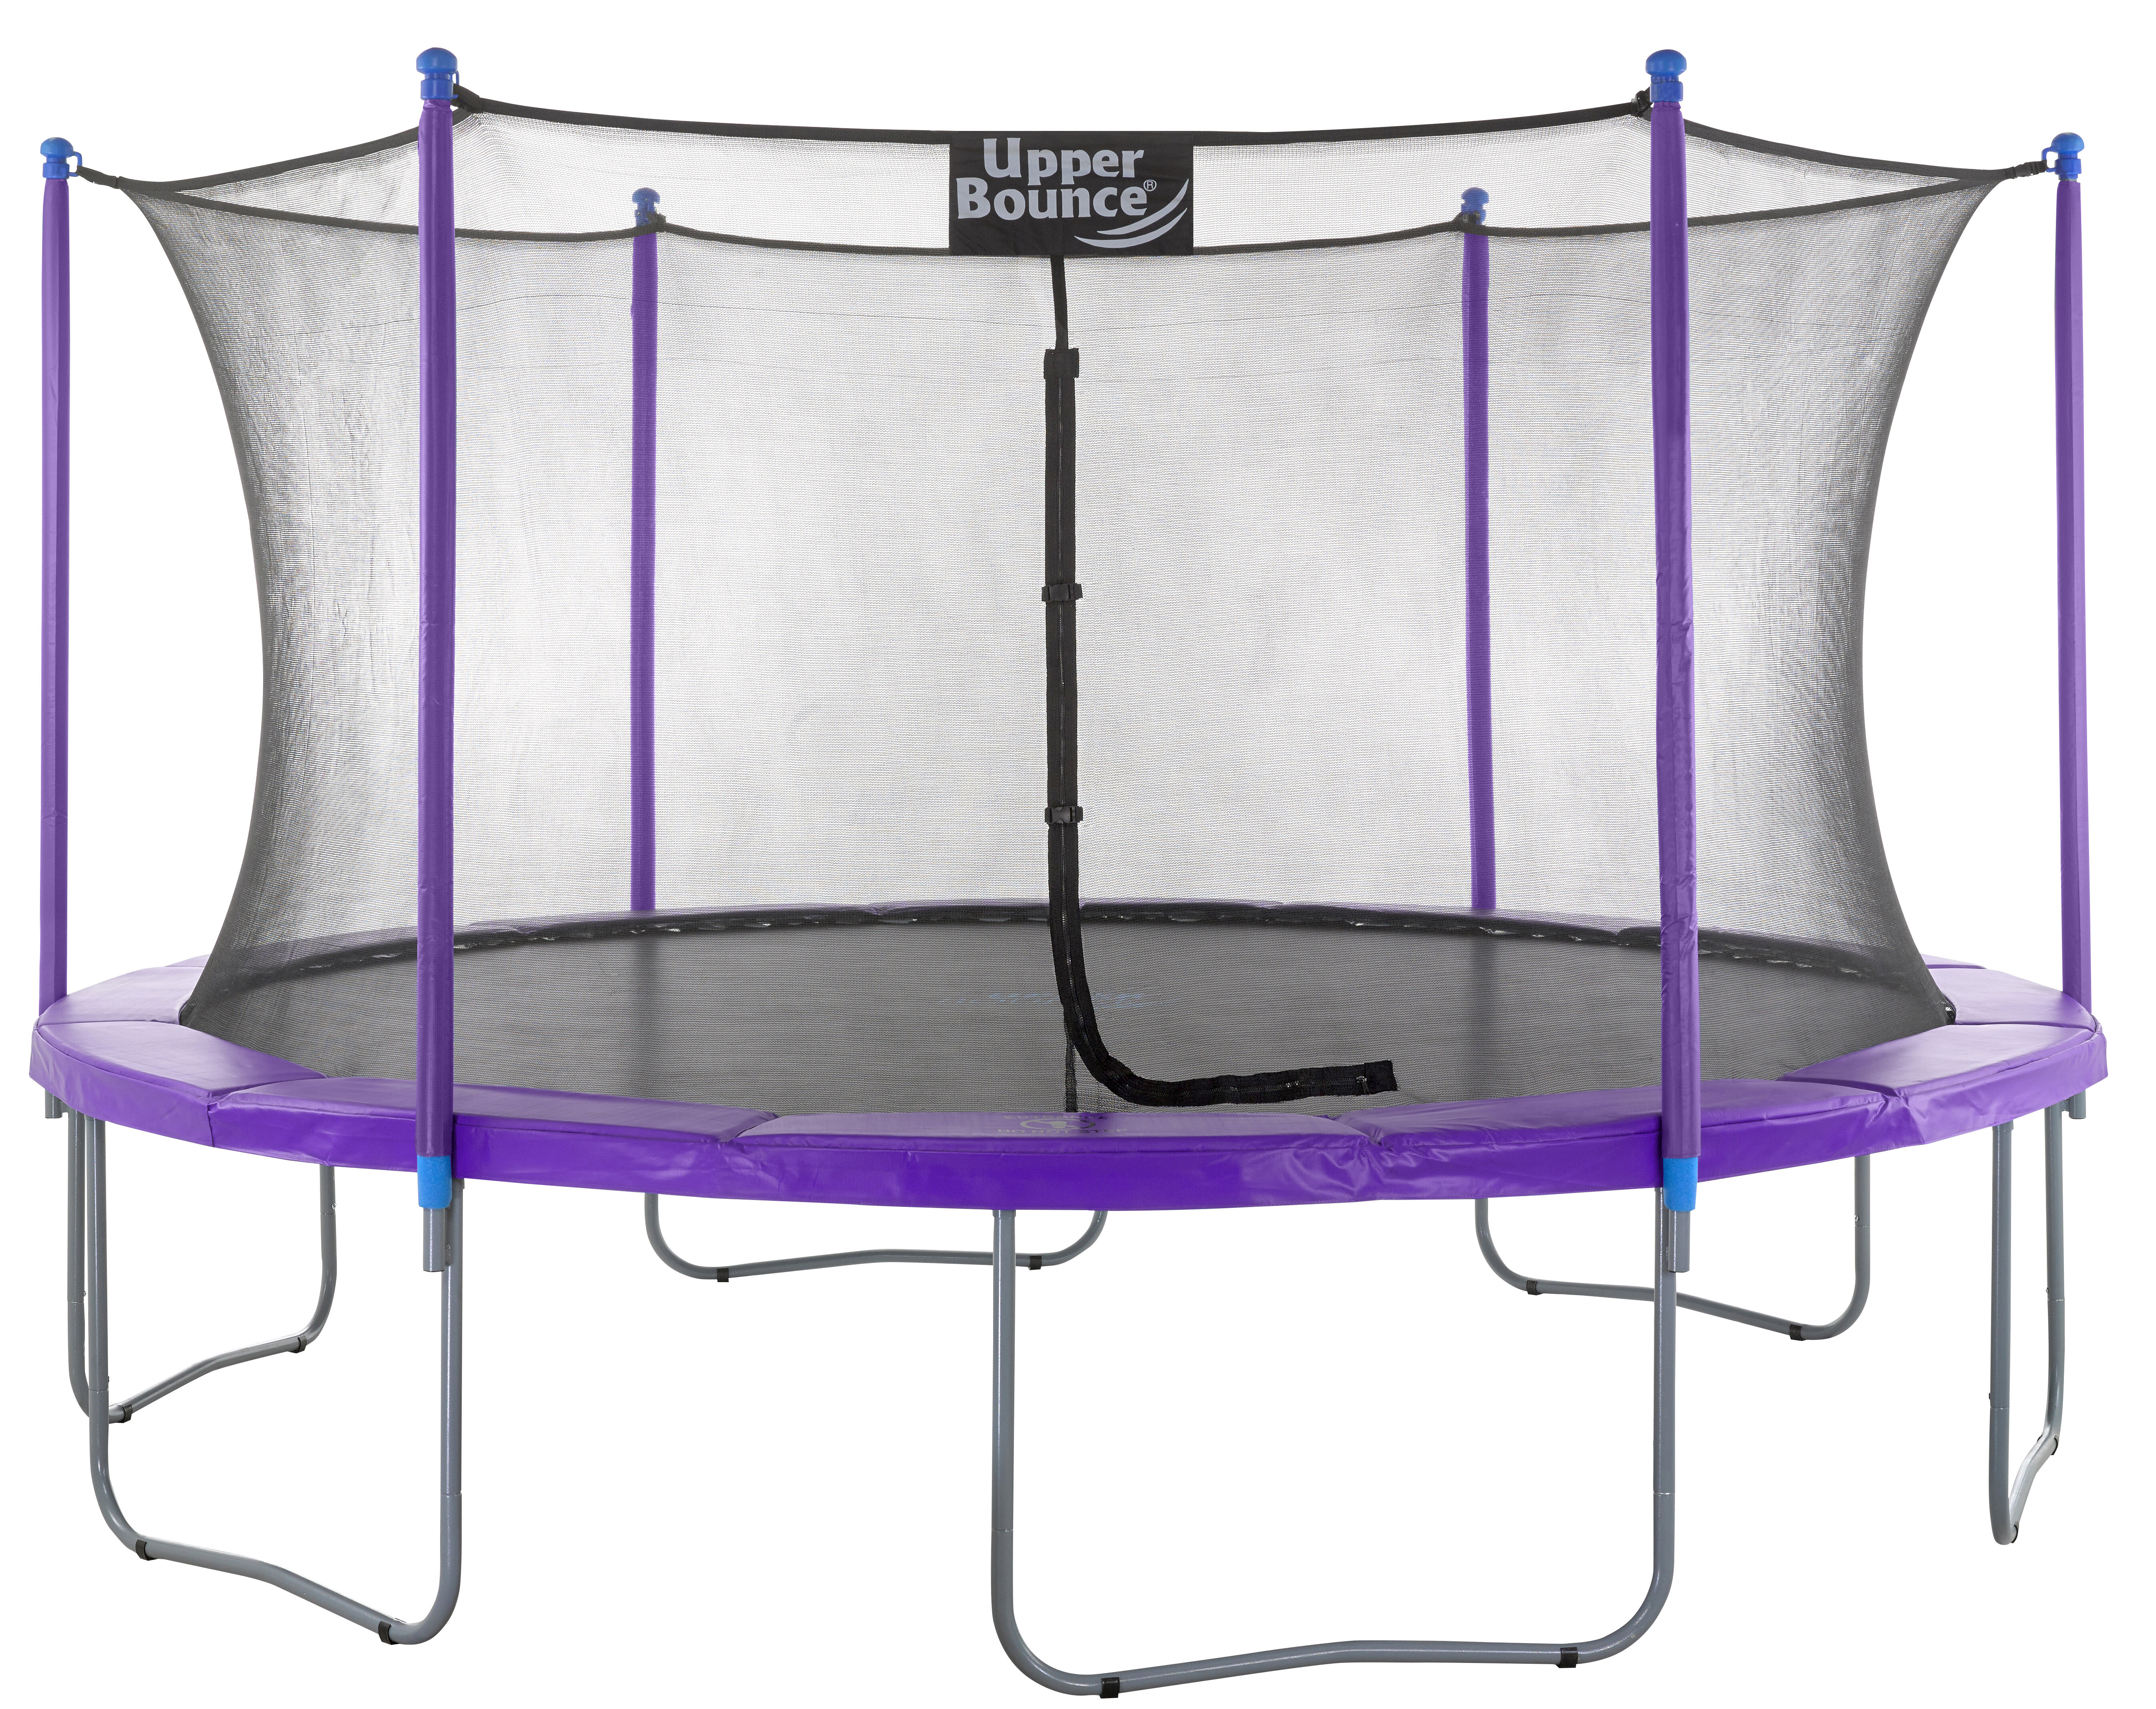 Upper Bounce Round Trampoline Set with Safety Enclosure System